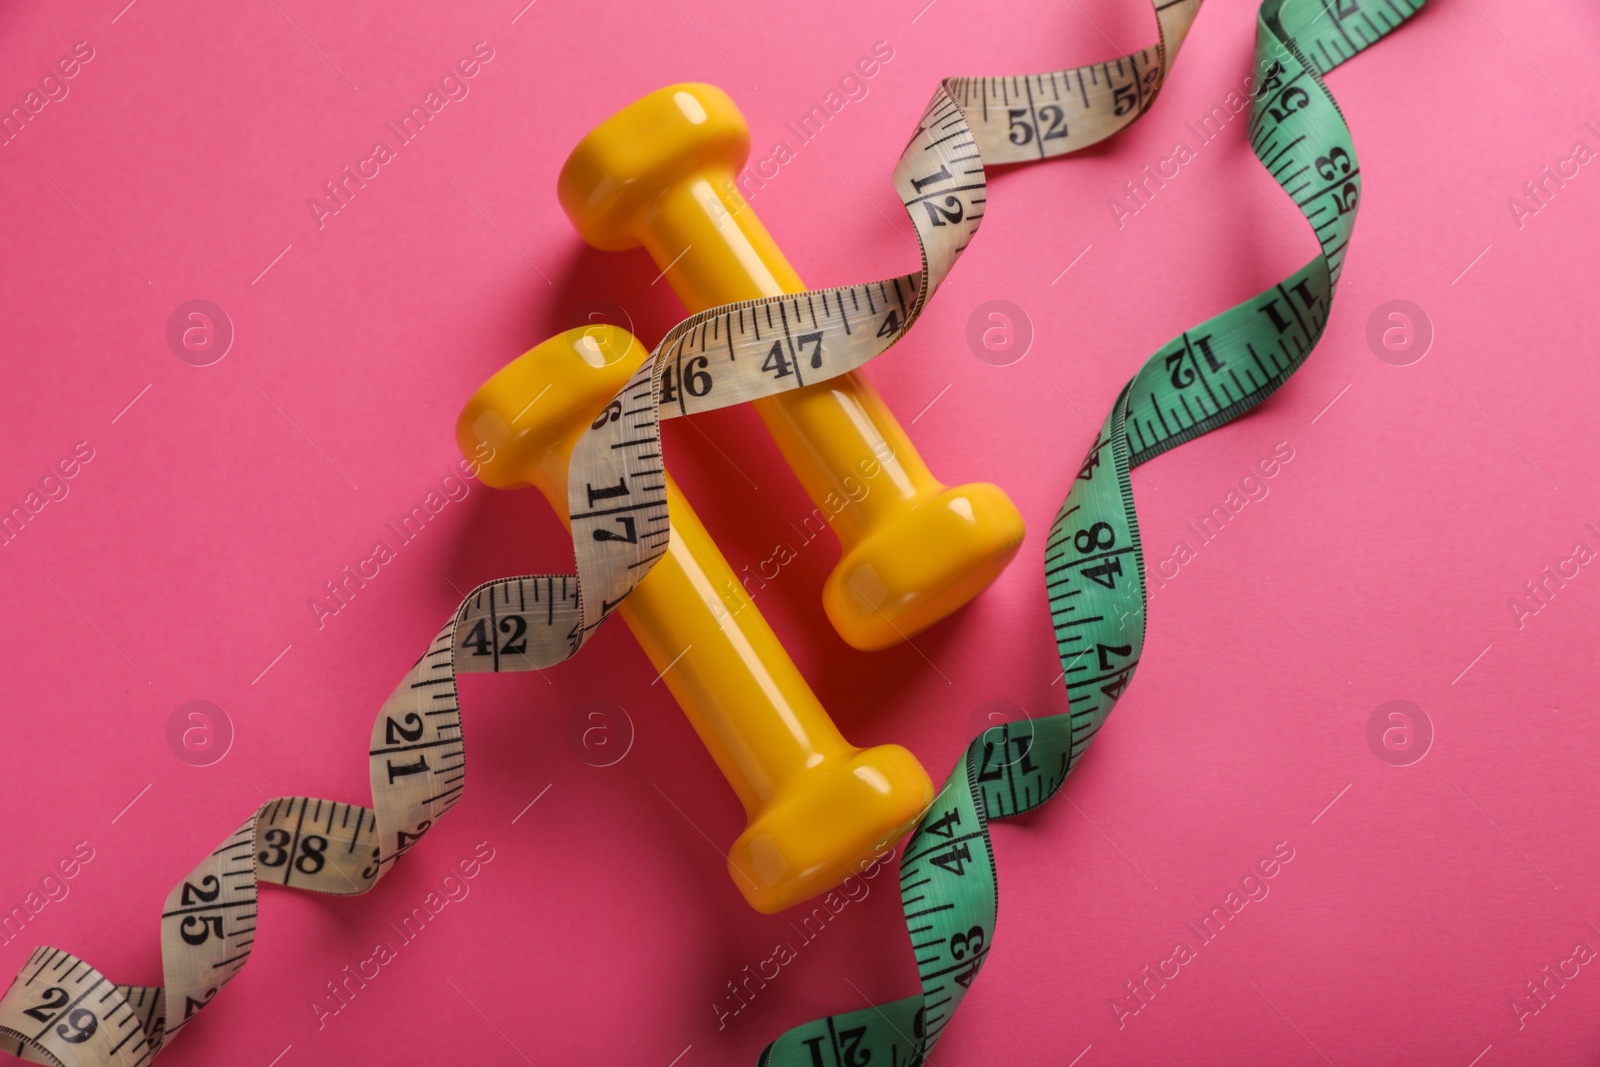 Photo of Measuring tapes and dumbbells on pink background, flat lay. Weight control concept